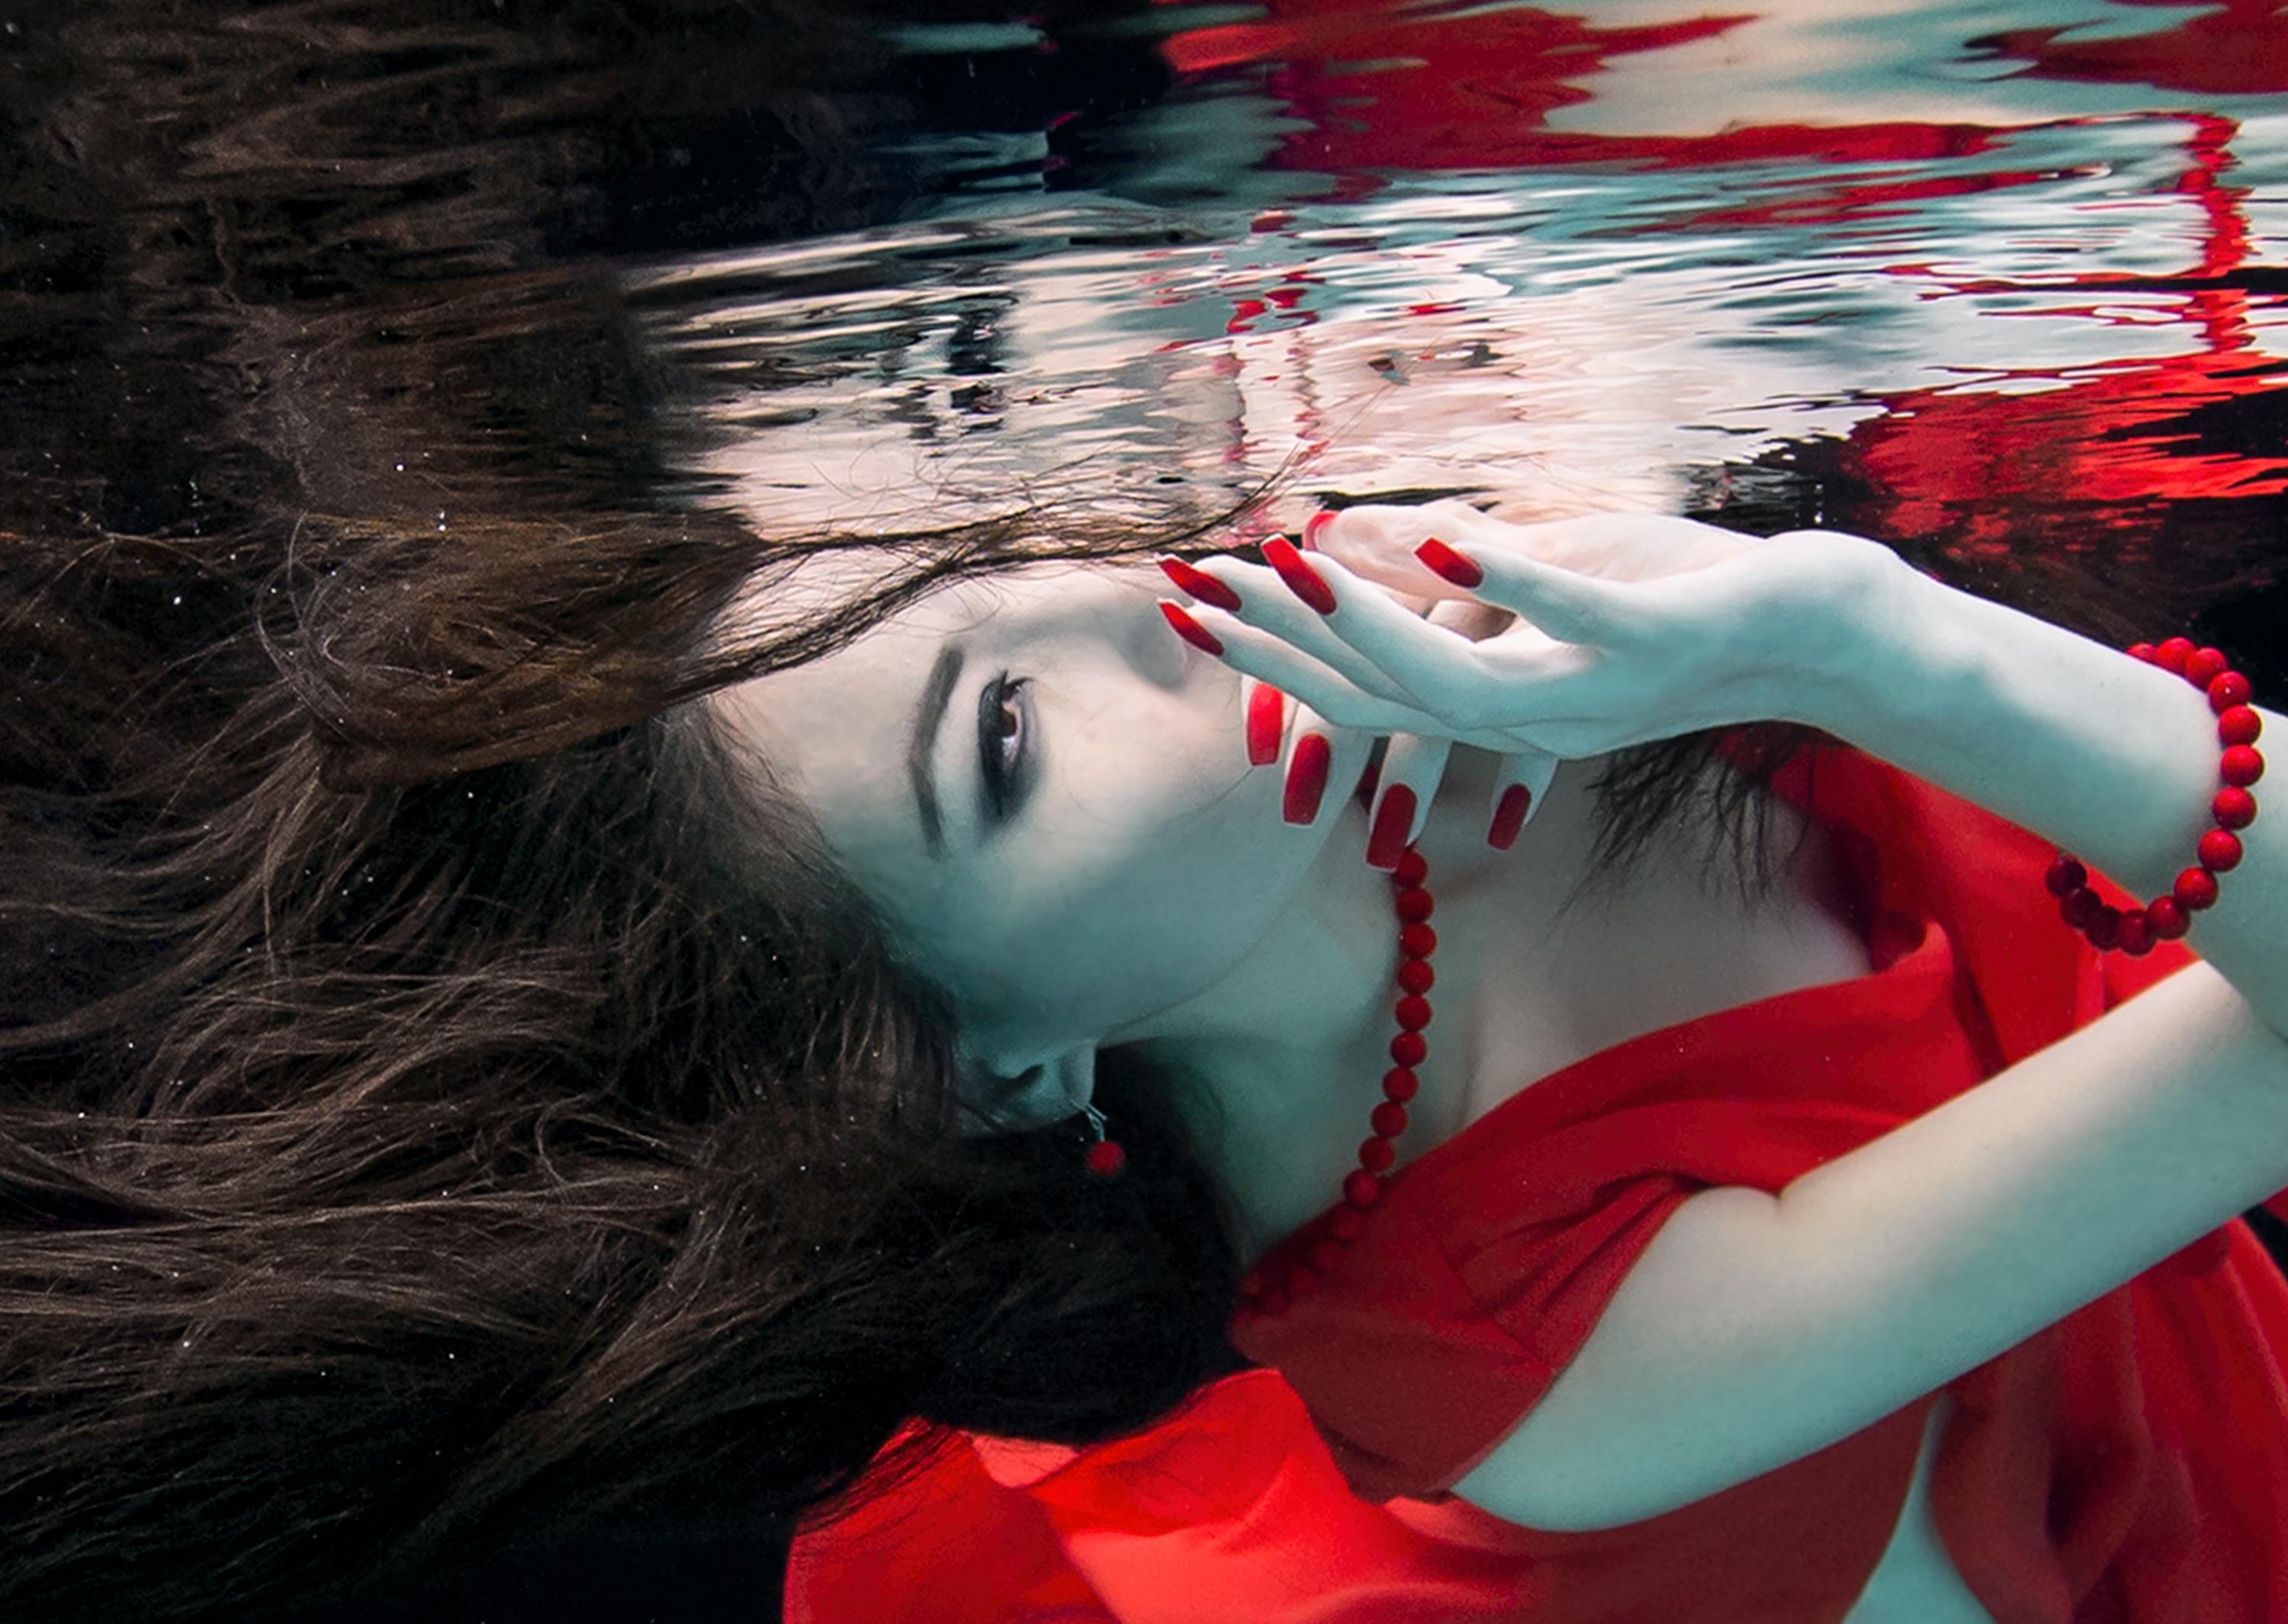 Underwater photograph of a gorgeous girl with dark hair in red dress.

Original digital print on aluminum plate signed by the artist.
Limited edition of 12
The artwork is furnished with certificate of authenticity, signed by artist with artist's